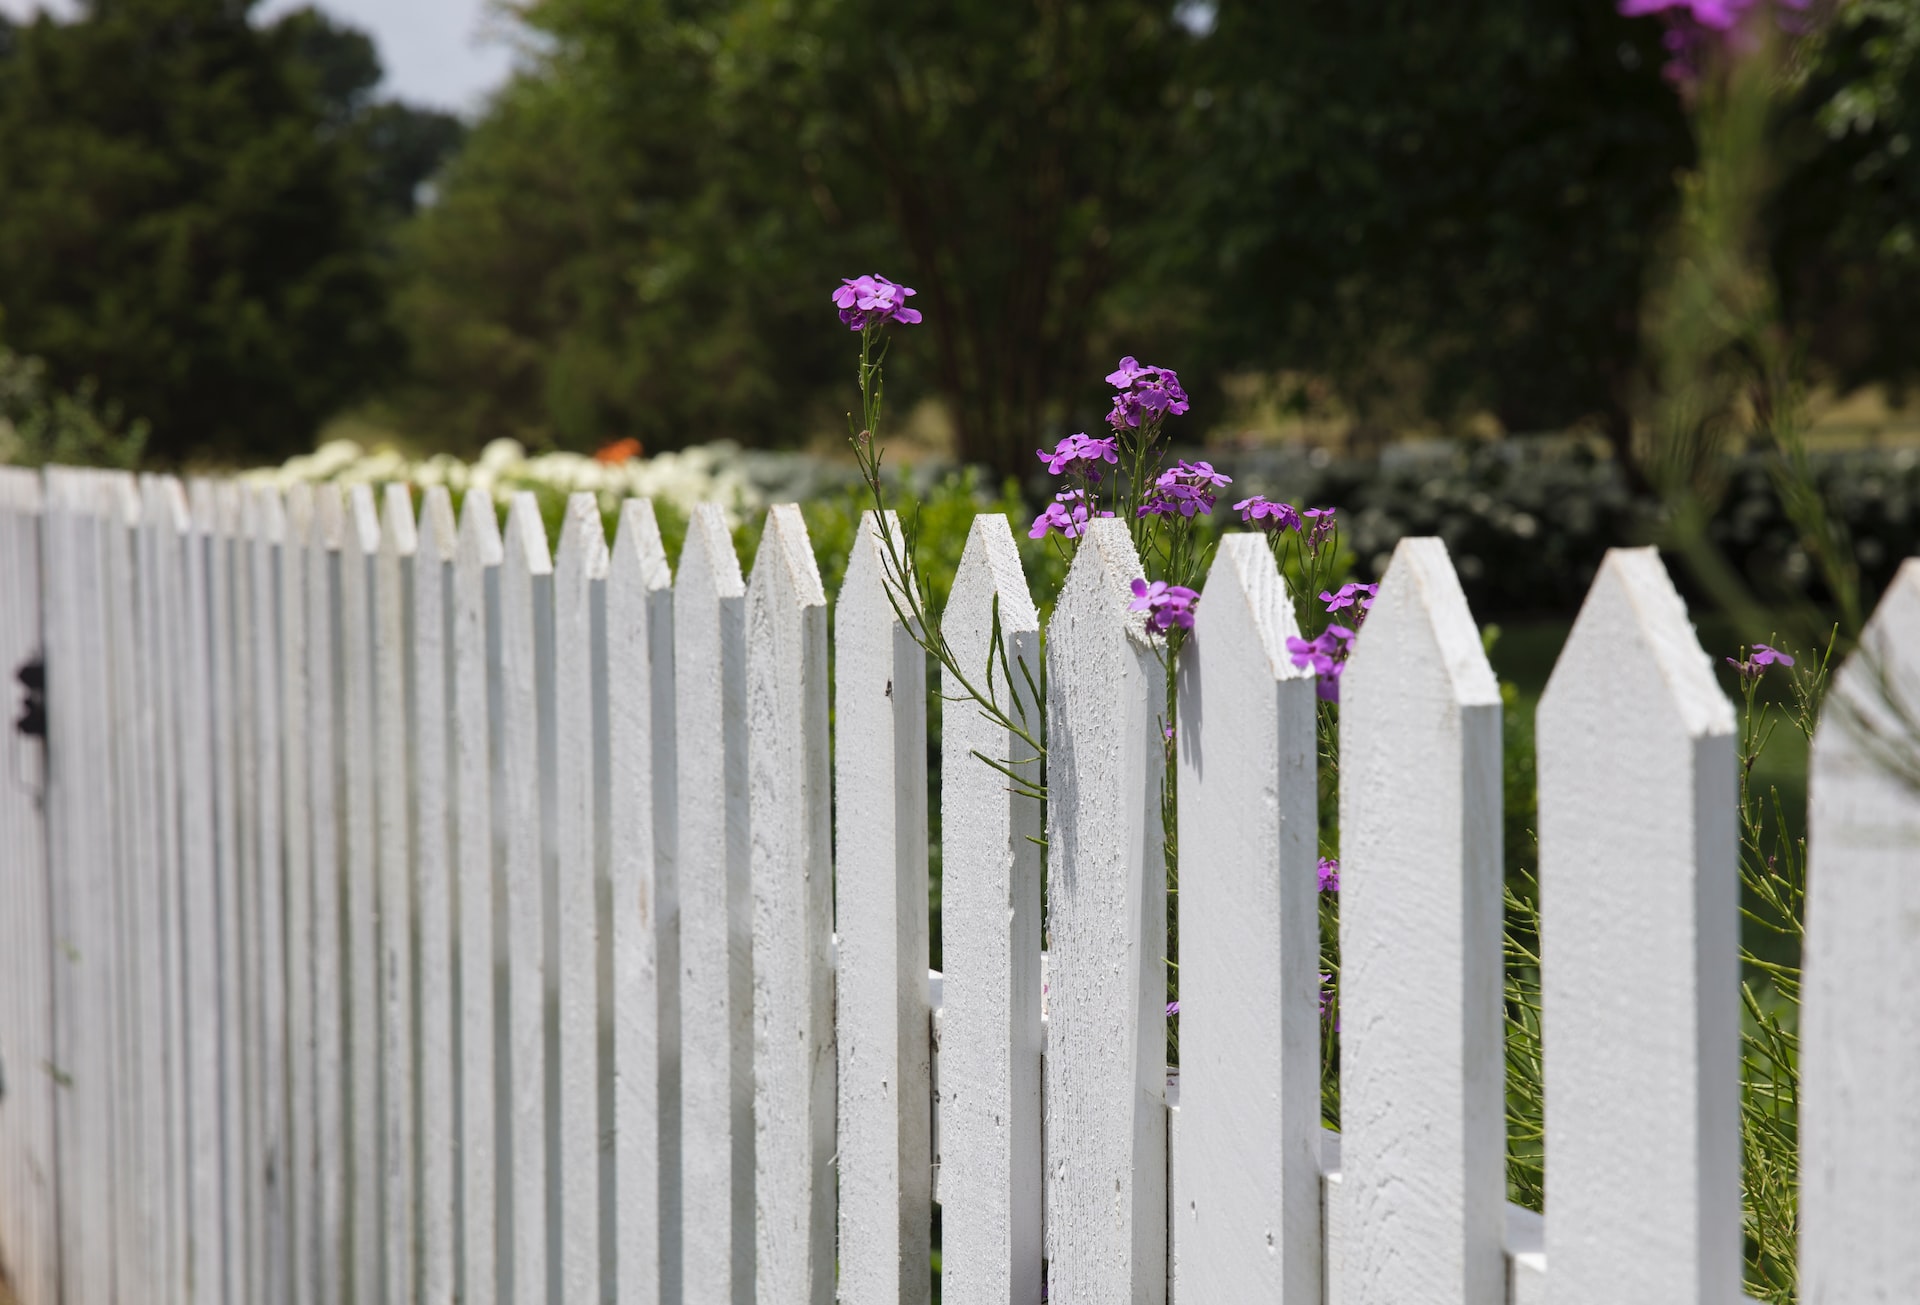 Neighbor Etiquette When a New Fence Is Being Installed